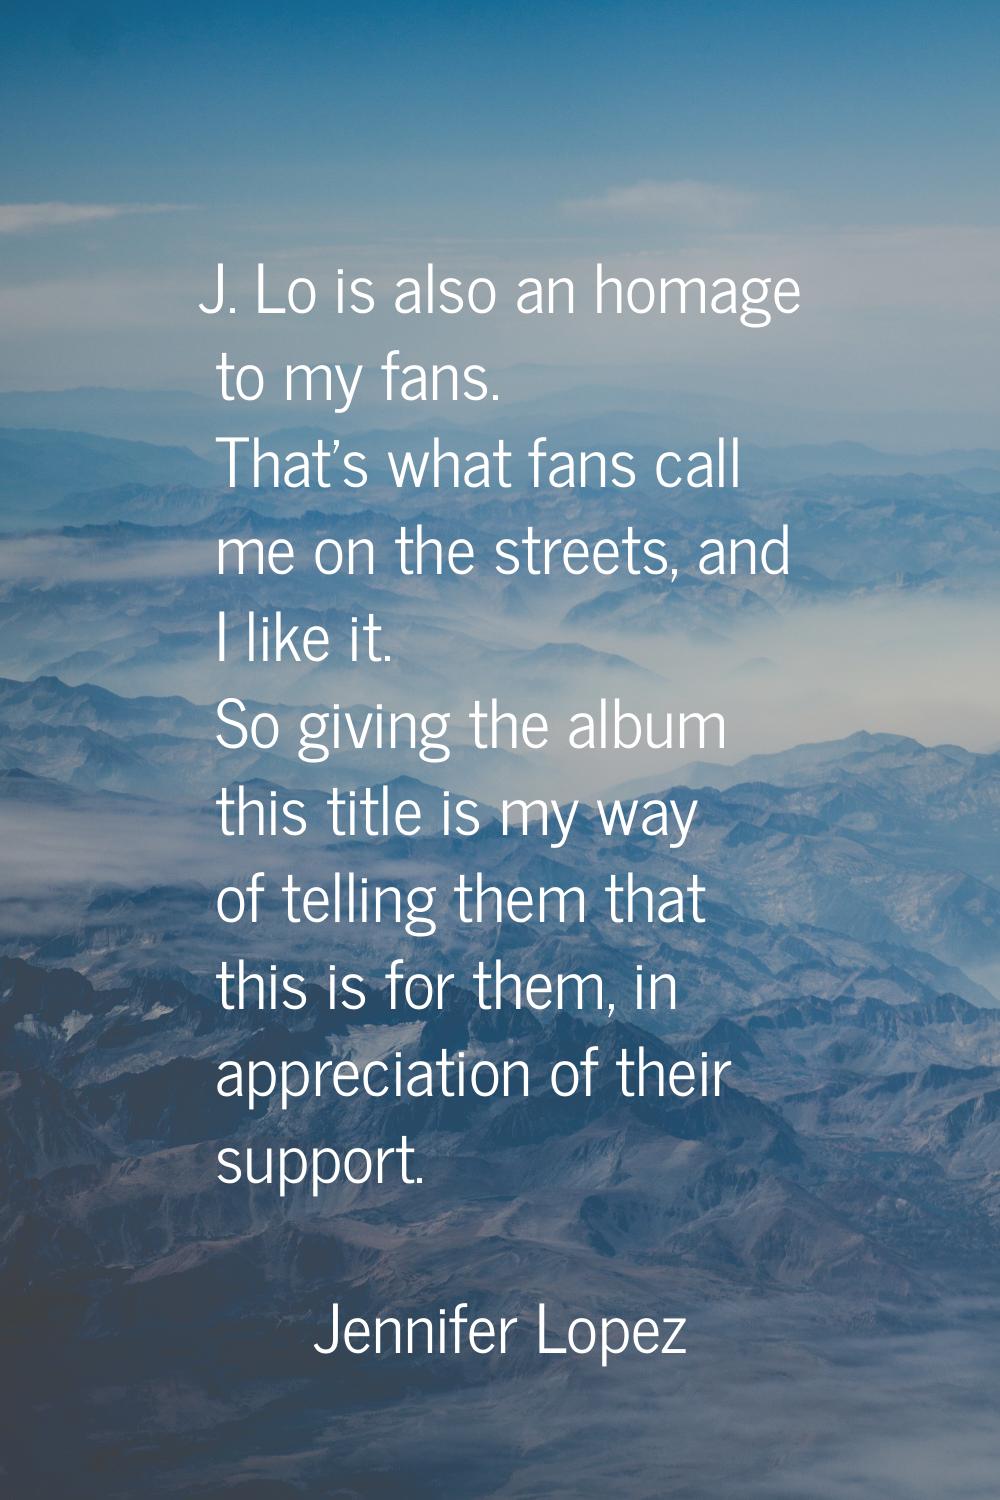 J. Lo is also an homage to my fans. That's what fans call me on the streets, and I like it. So givi